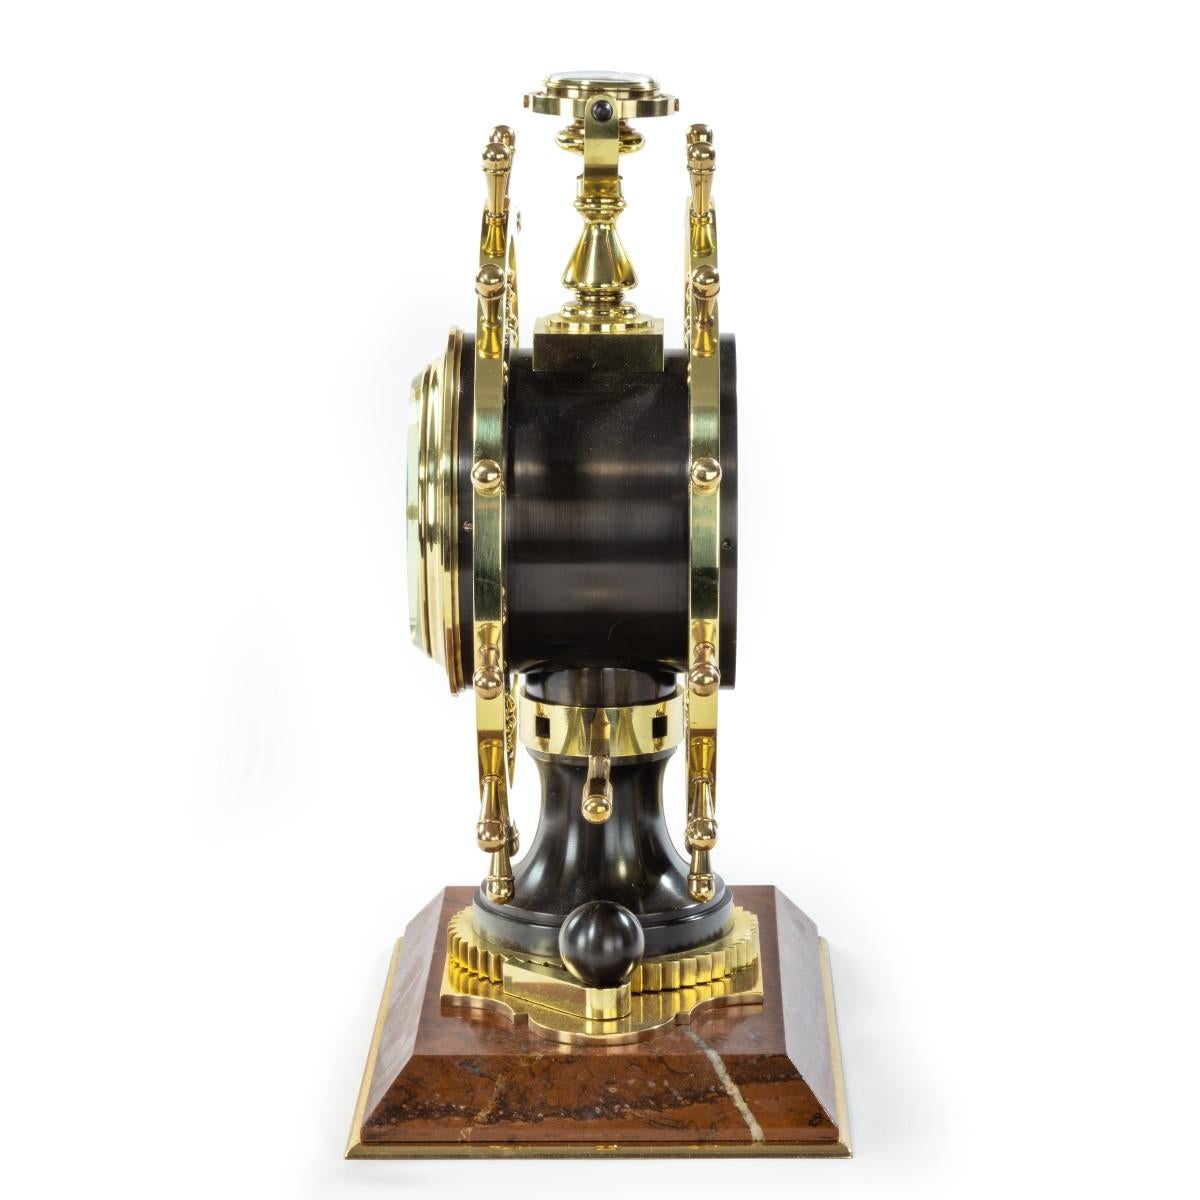 Late 19th Century Victorian Double Steering-Wheel Desk Clock and Barometer Racing Trophy